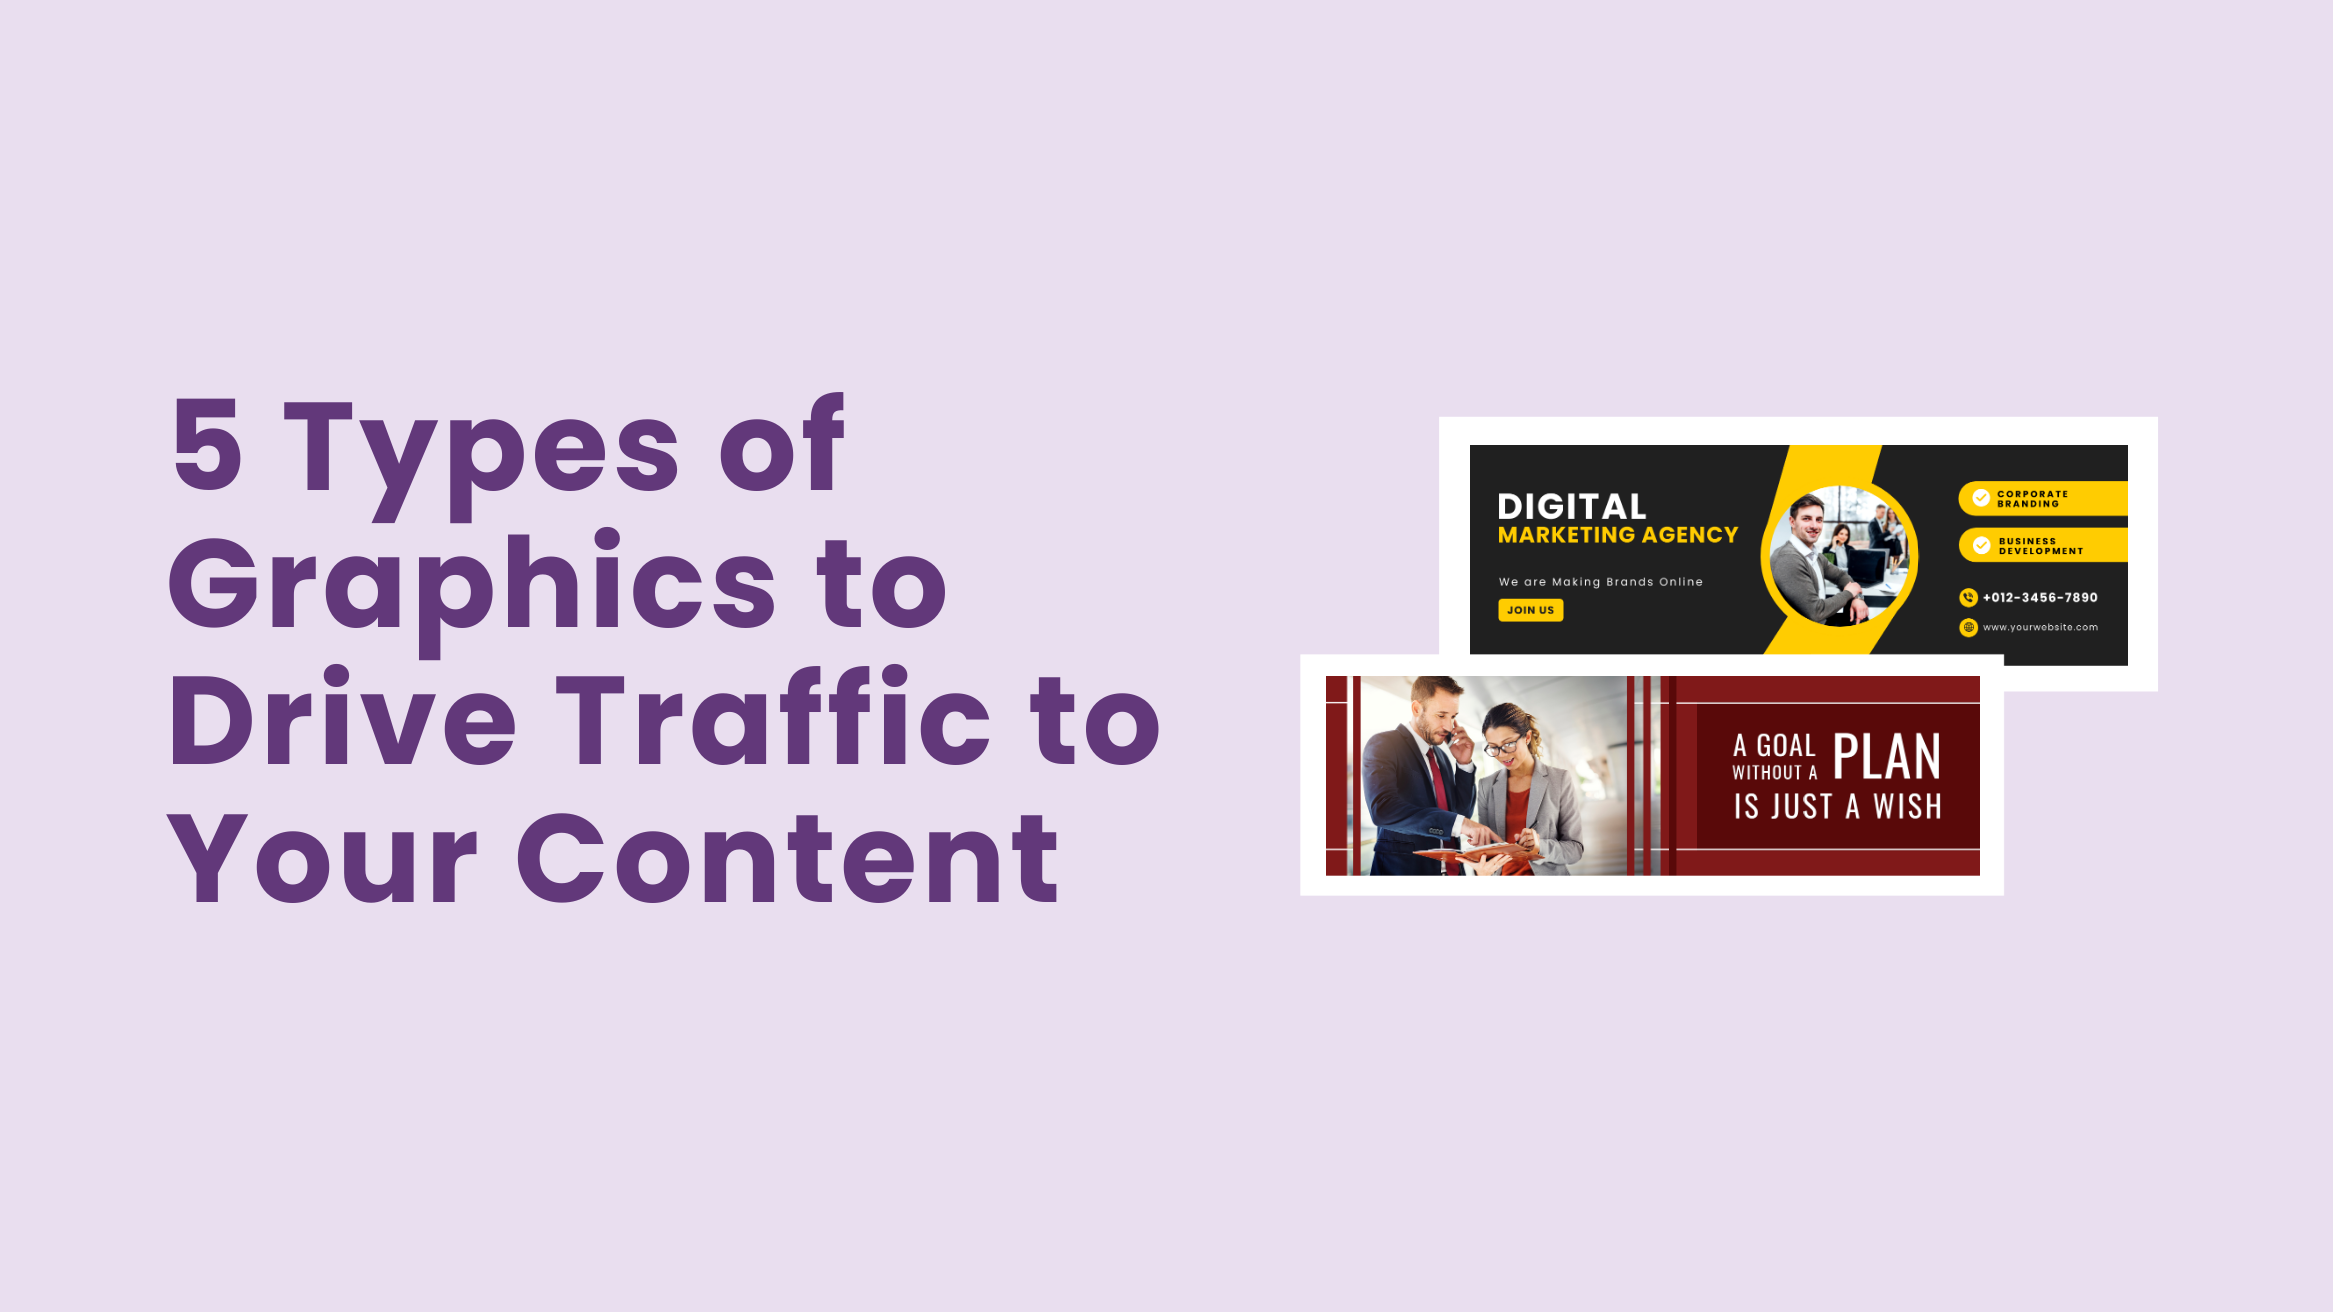 5 Types of Graphics to Drive Traffic to Your Content